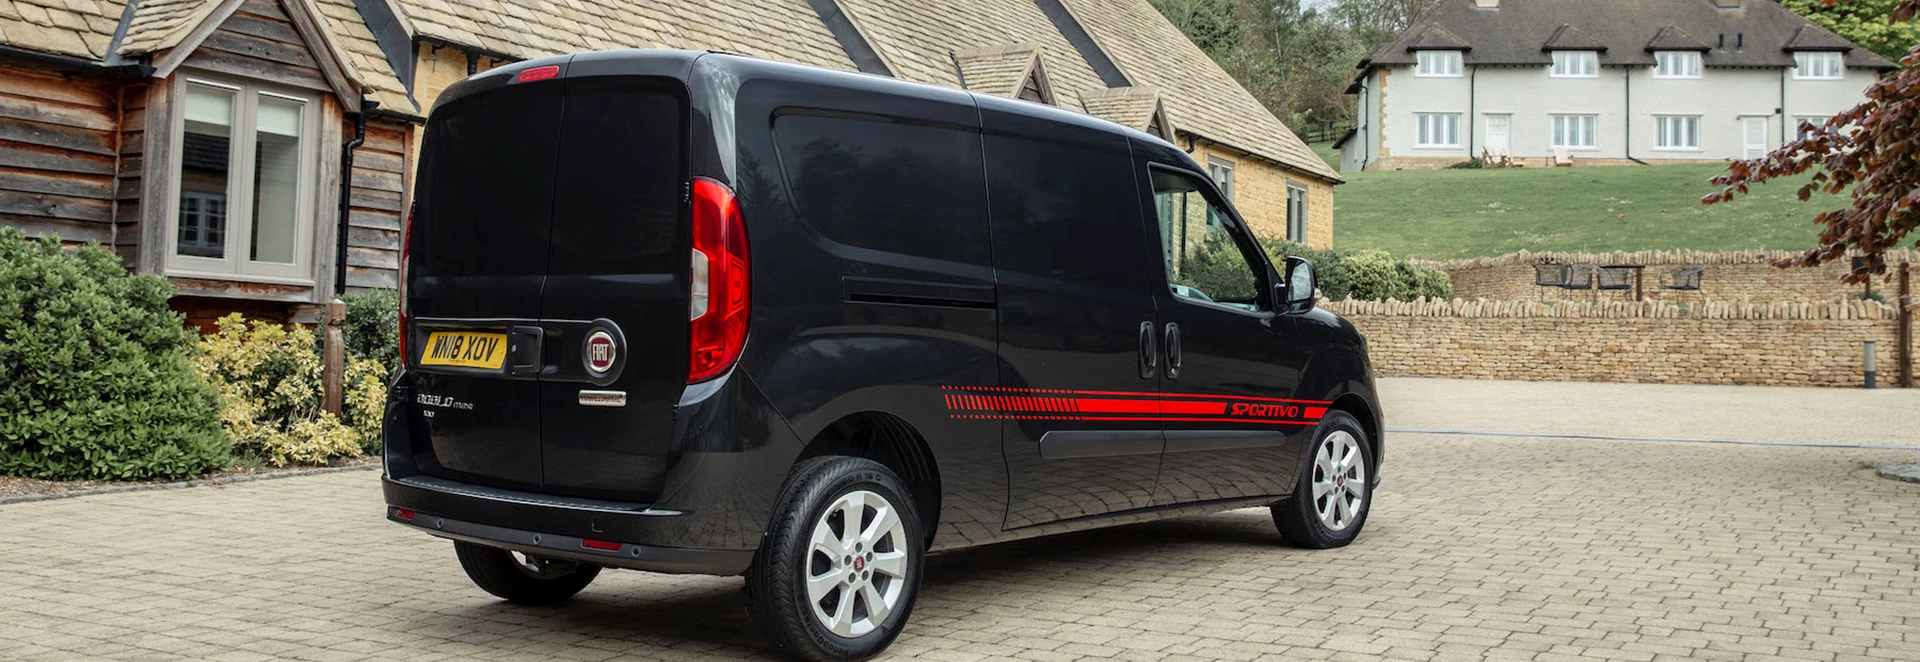 You can now finance a new Fiat van on a pay-as-you-go scheme 